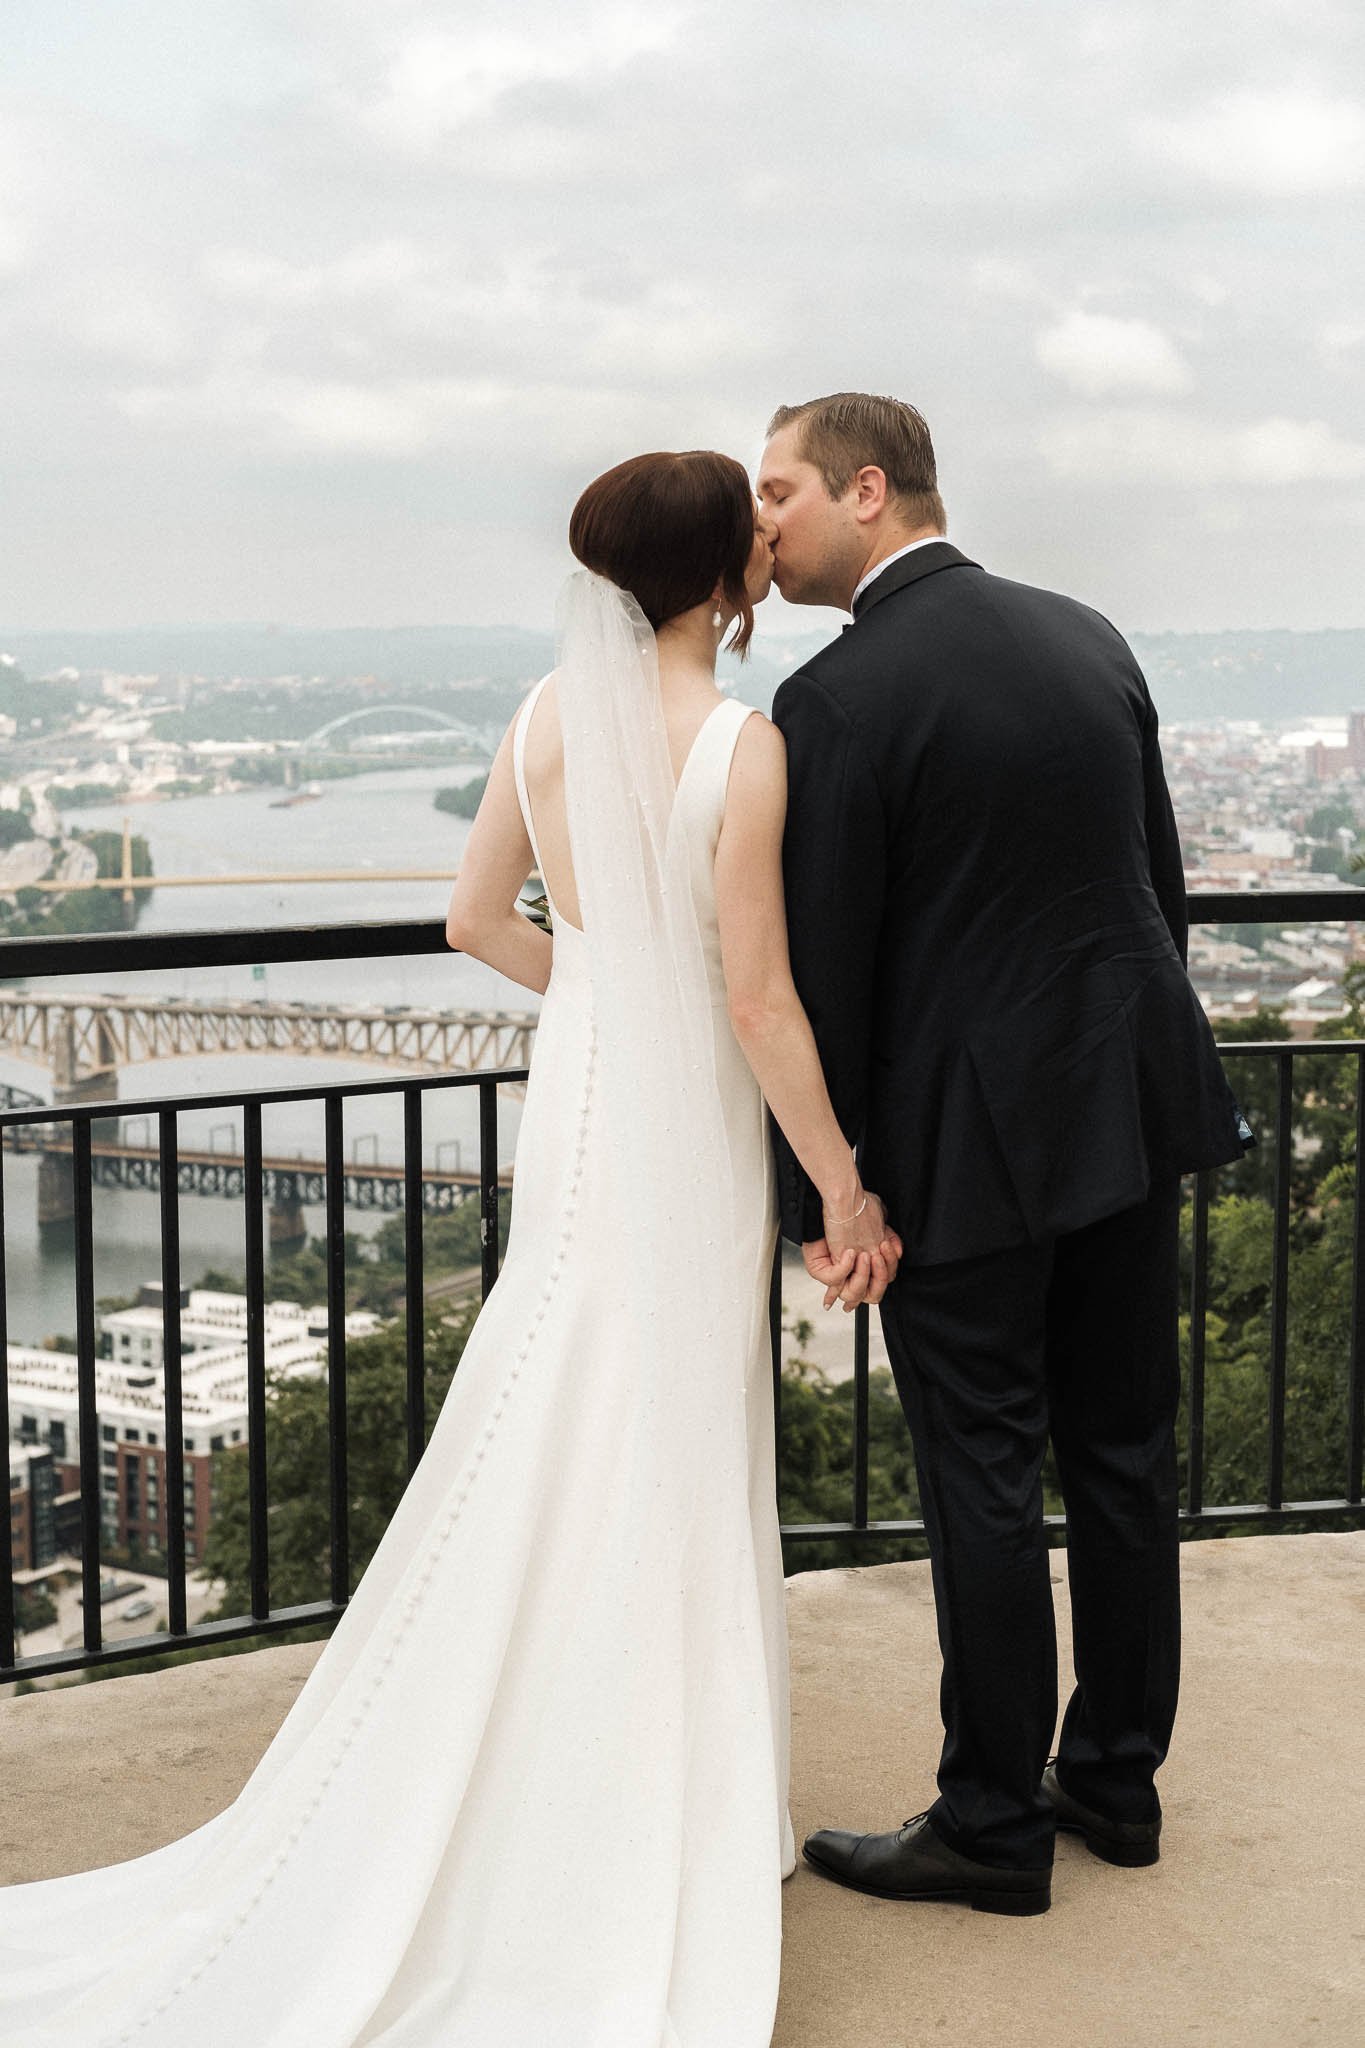  downtown pittsburgh wedding bride and groom photos 